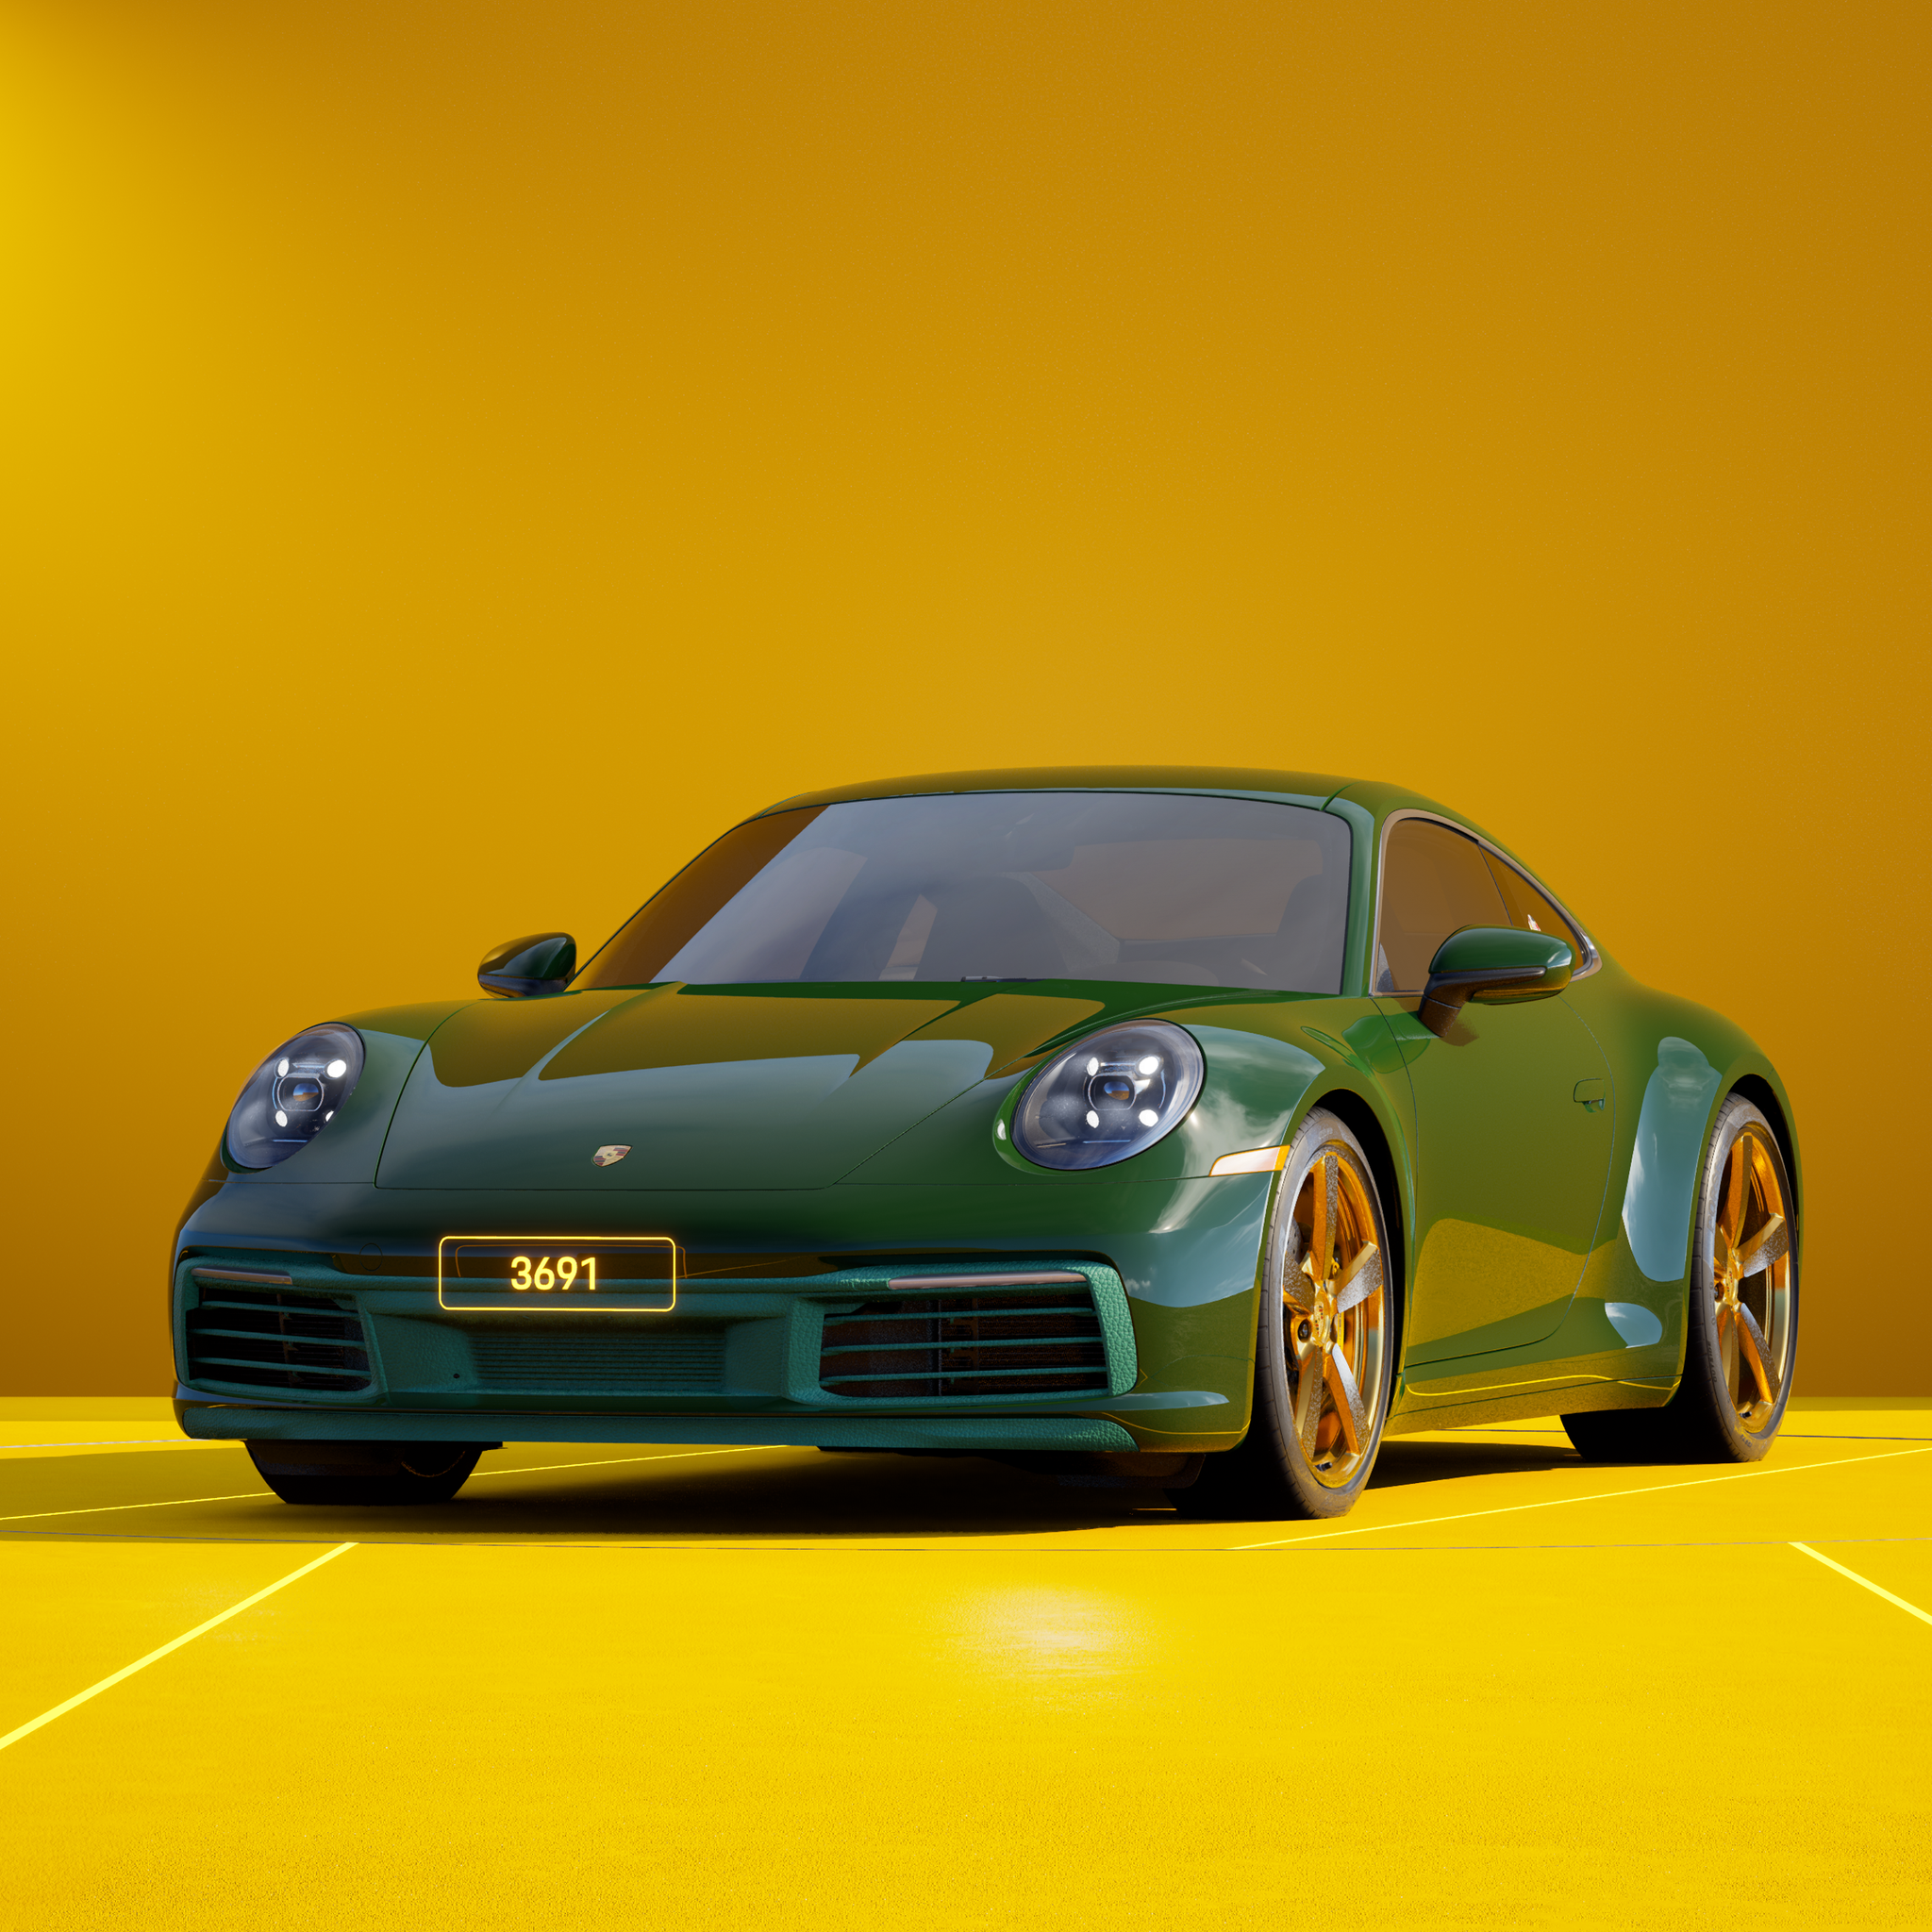 The PORSCHΞ 911 3691 image in phase